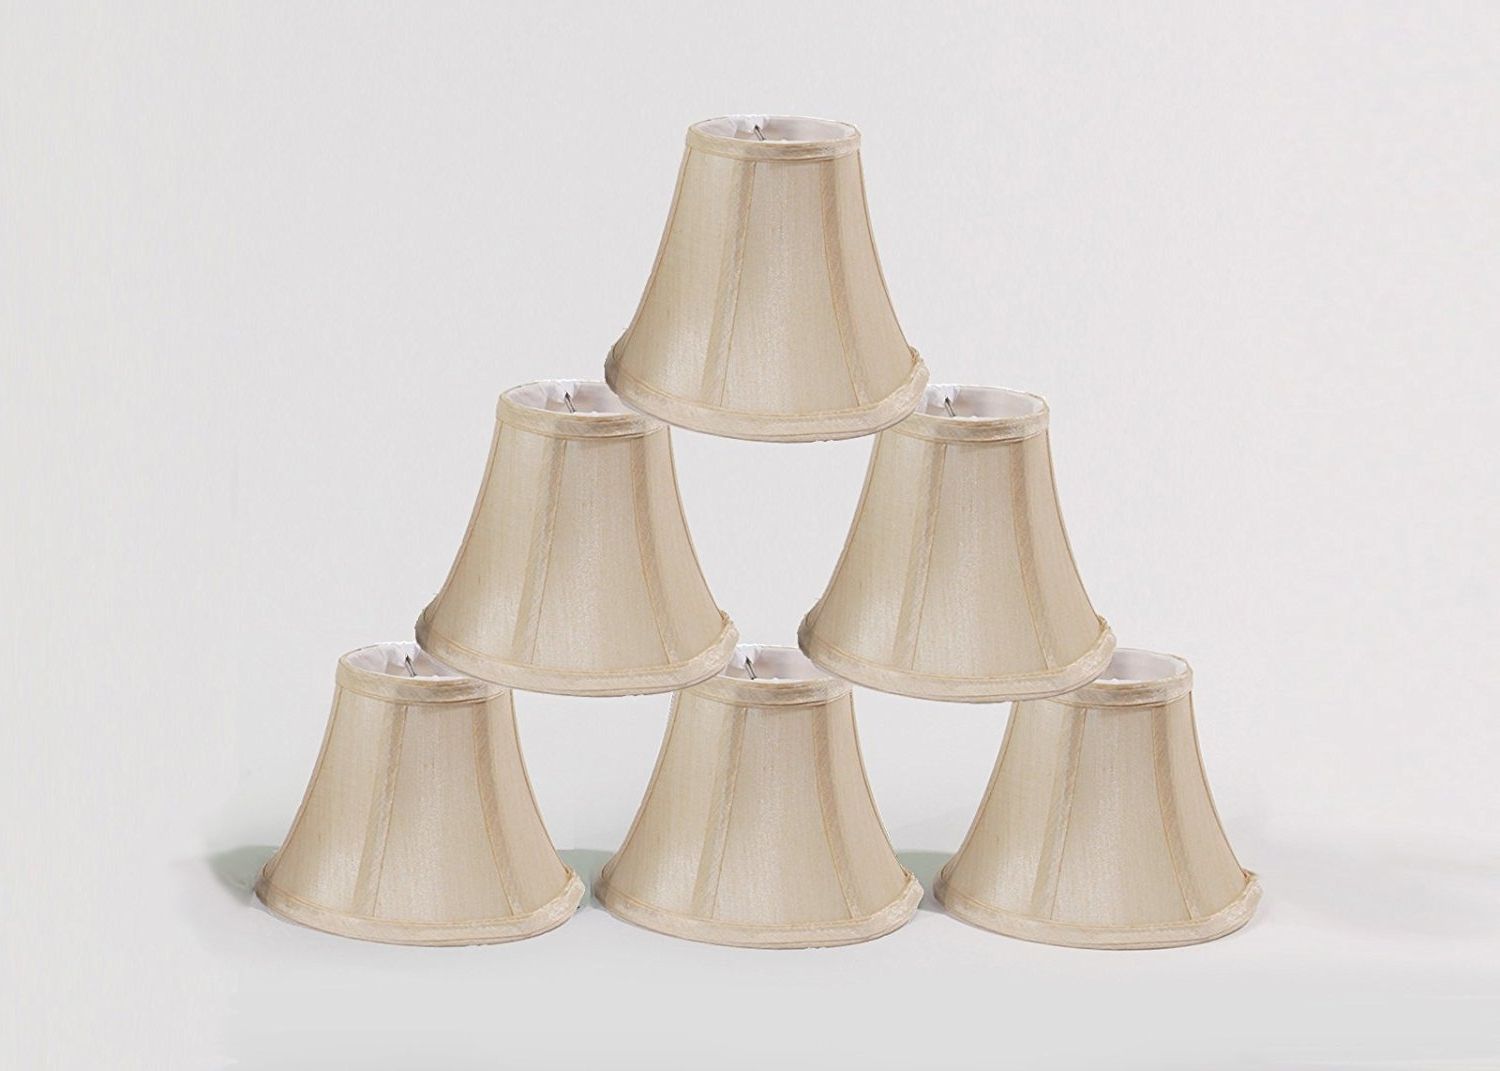 Preferred Chandelier Lamp Shades With Regard To Urbanest Chandelier Lamp Shades, Set Of 6, Soft Bell 3"x 6"x  (View 5 of 15)